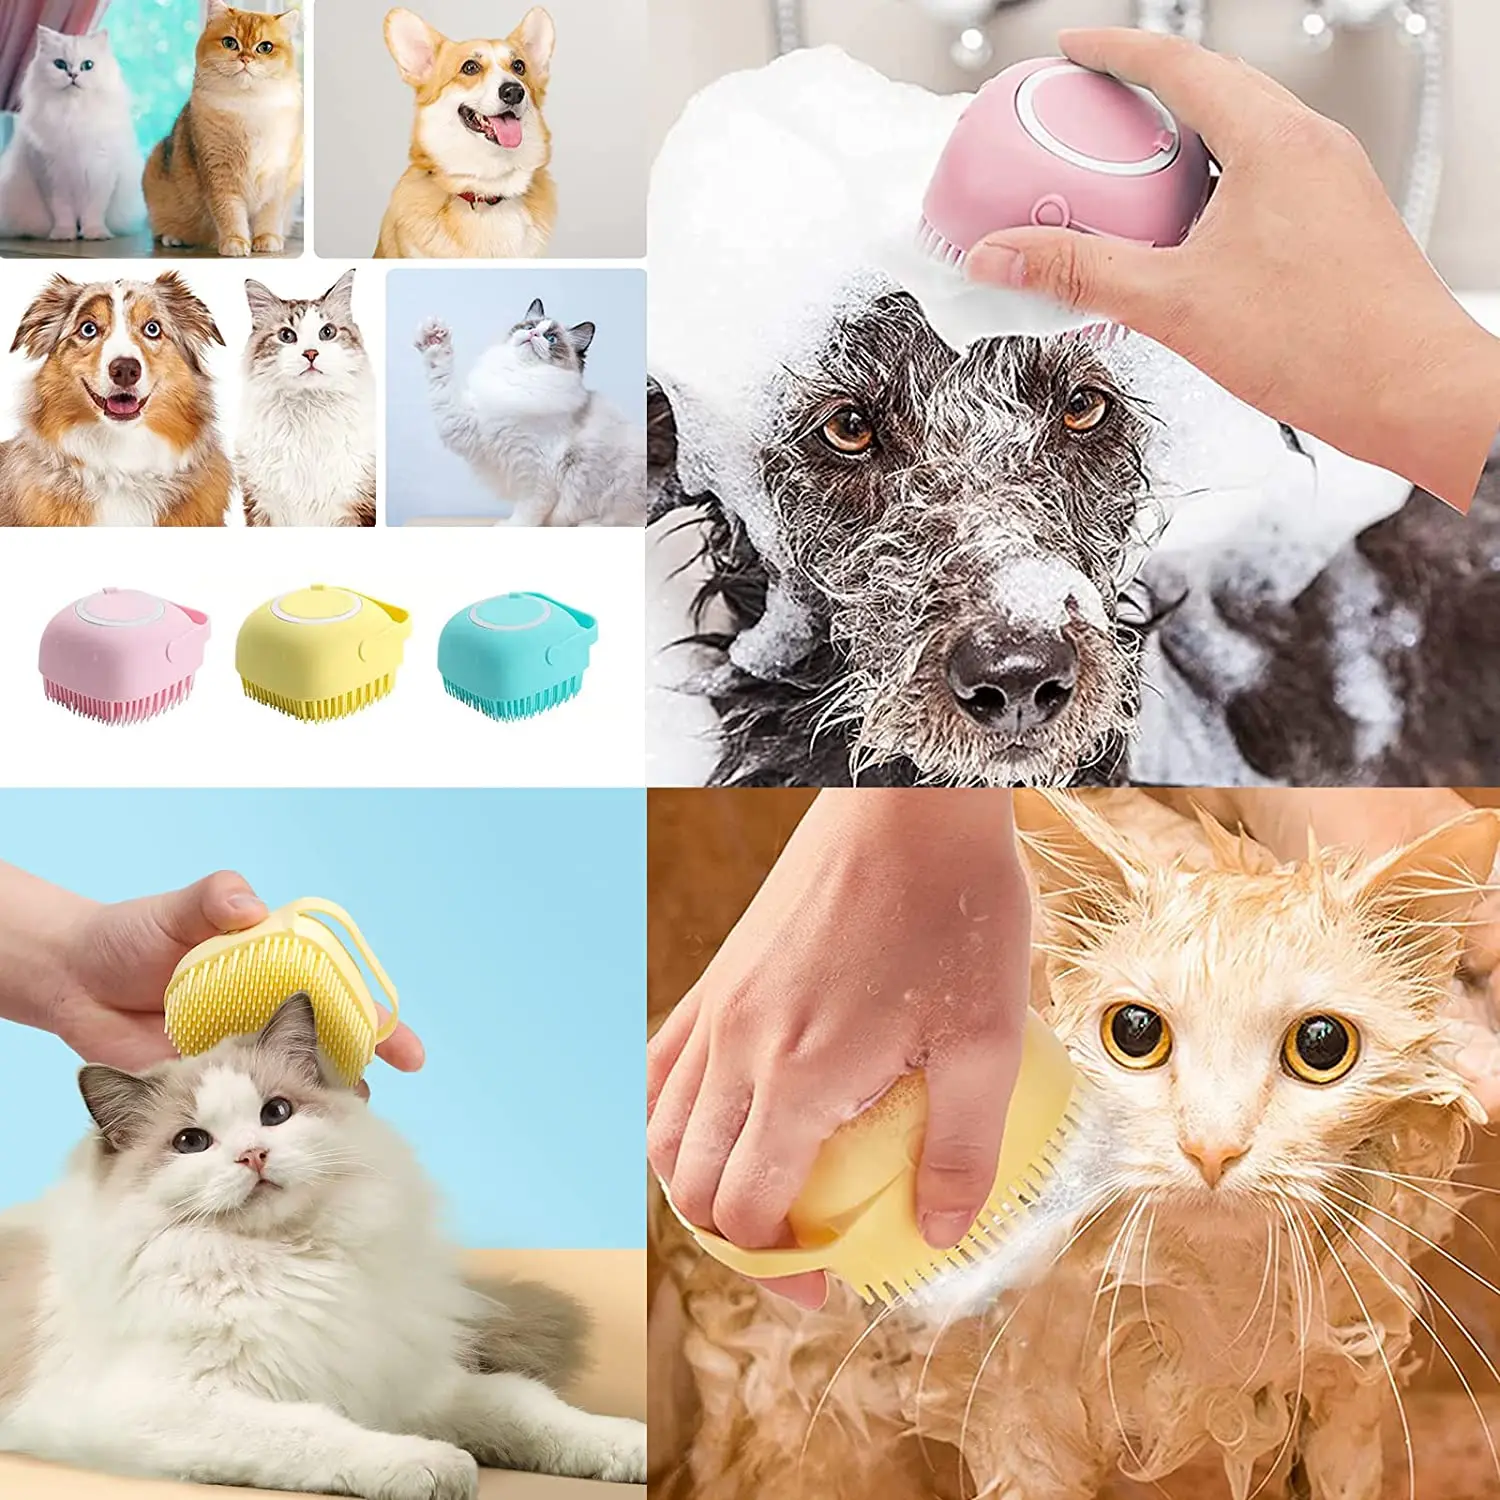 Misthis Portable Dog Bath Brush - Pet Massage Brush Shampoo Dispenser Soft  Silicone Brush Rubber Bristle for Dogs and Cats Shower Grooming (Blue)